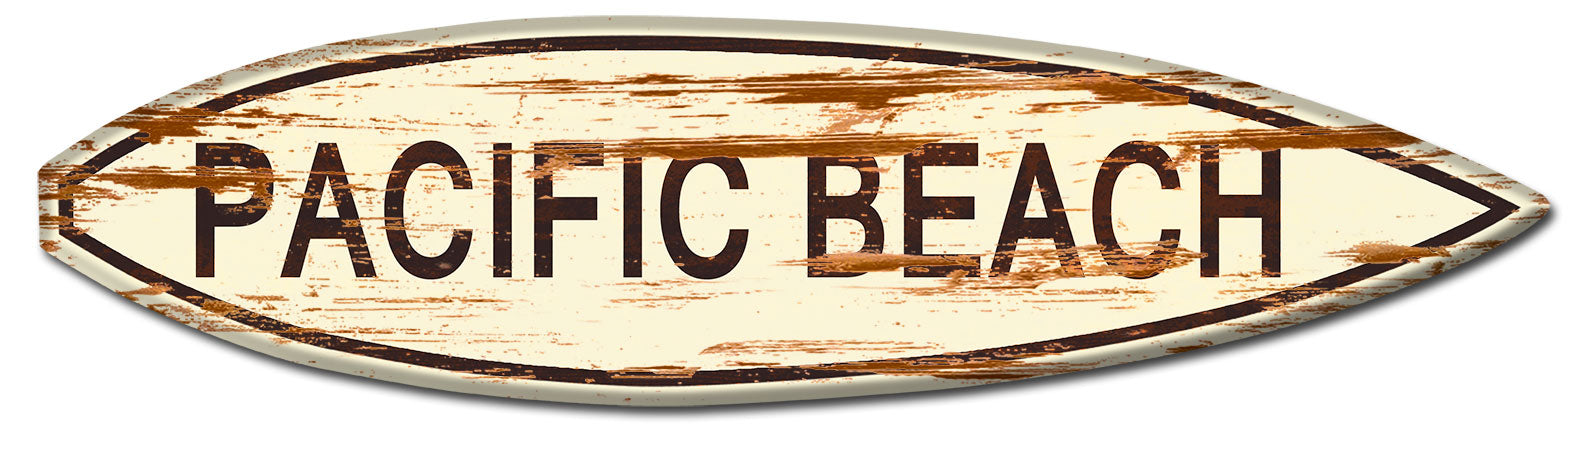 Pacific Beach Surf Board Wood Print Vintage Sign